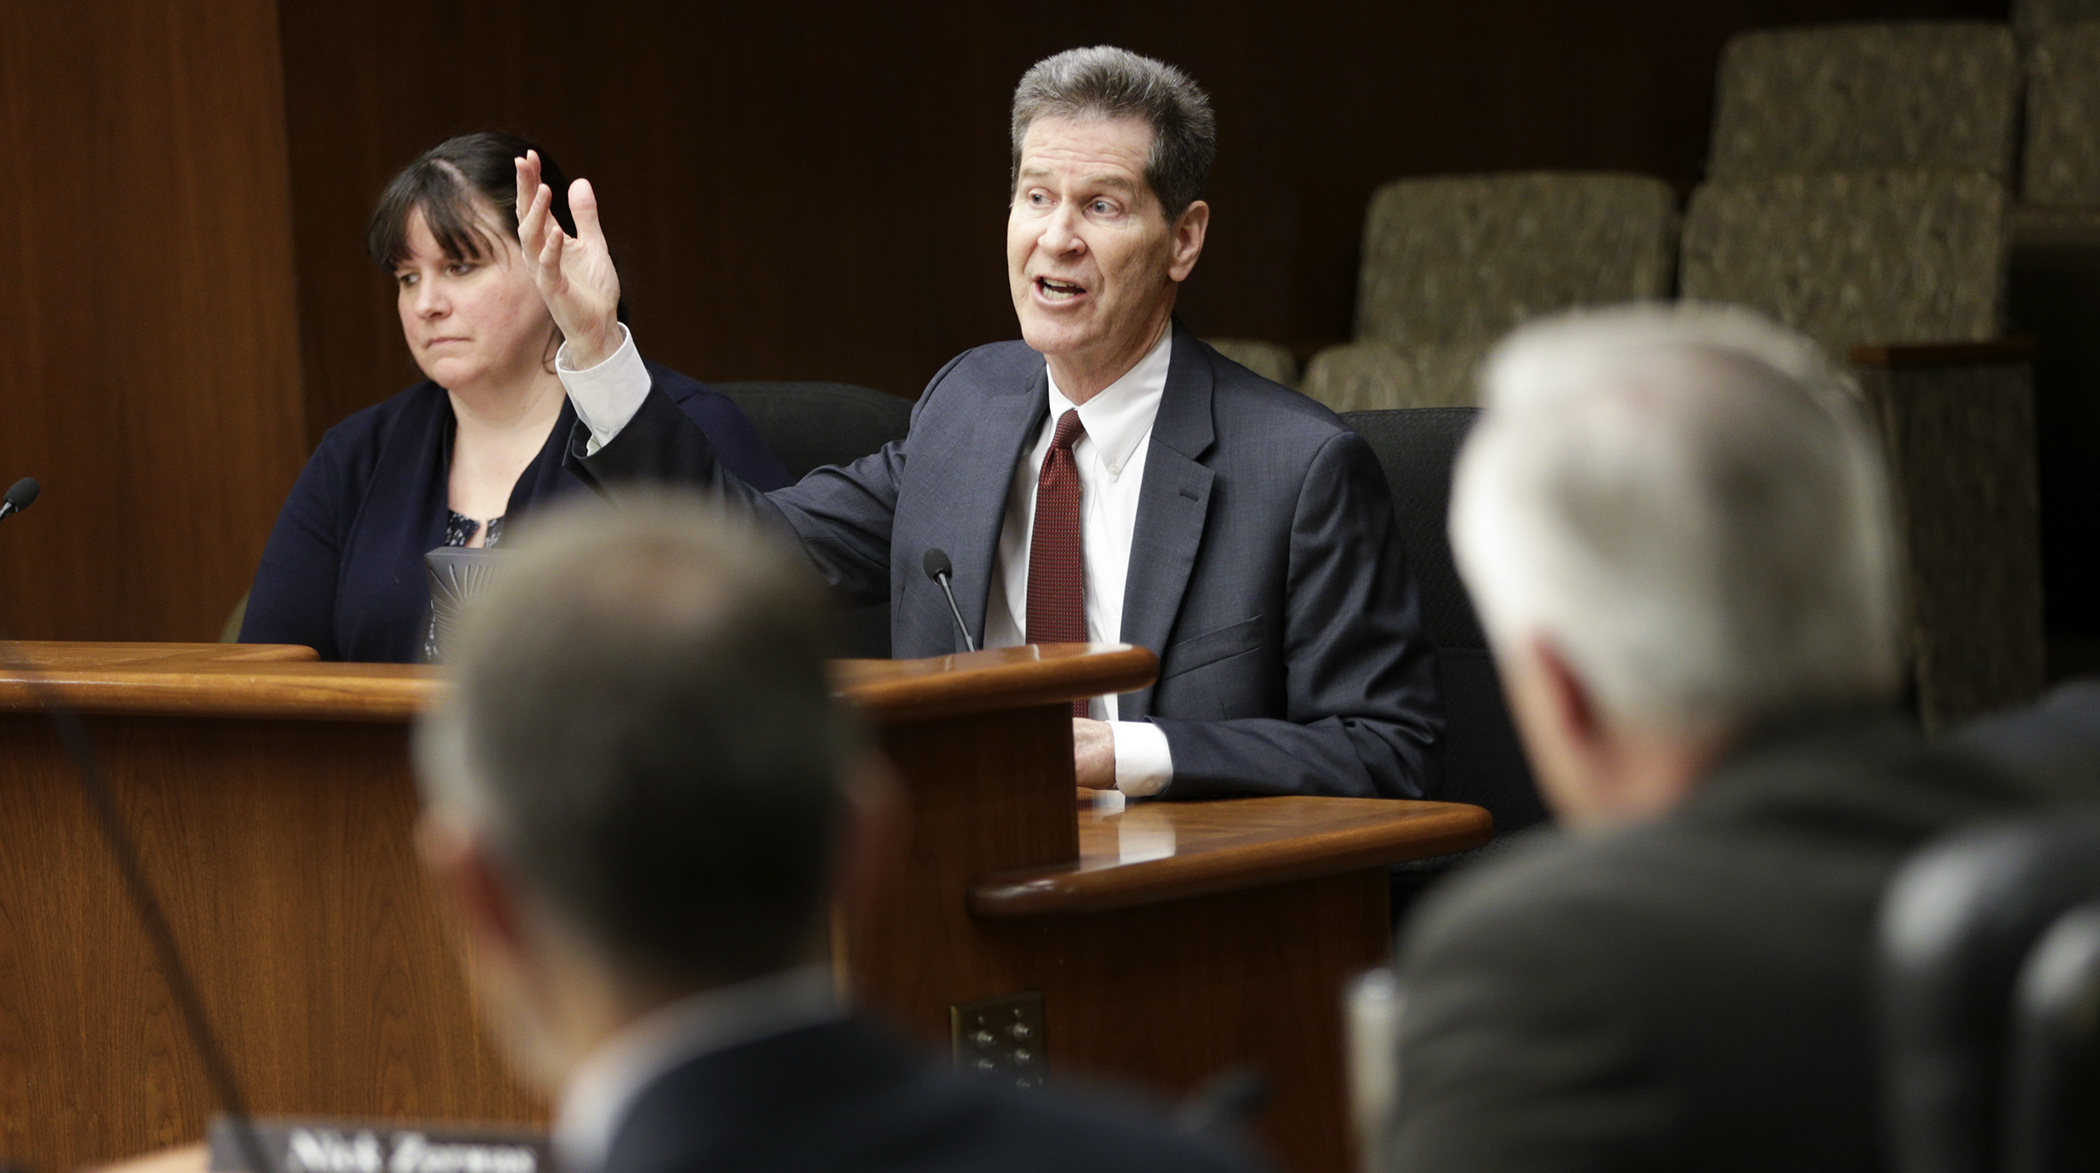 Larry Pogemiller, commissioner of the Office of Higher Education, answers a question on the governor's higher education supplemental budget request during testimony before the House higher education committee. Photo by Paul Battaglia